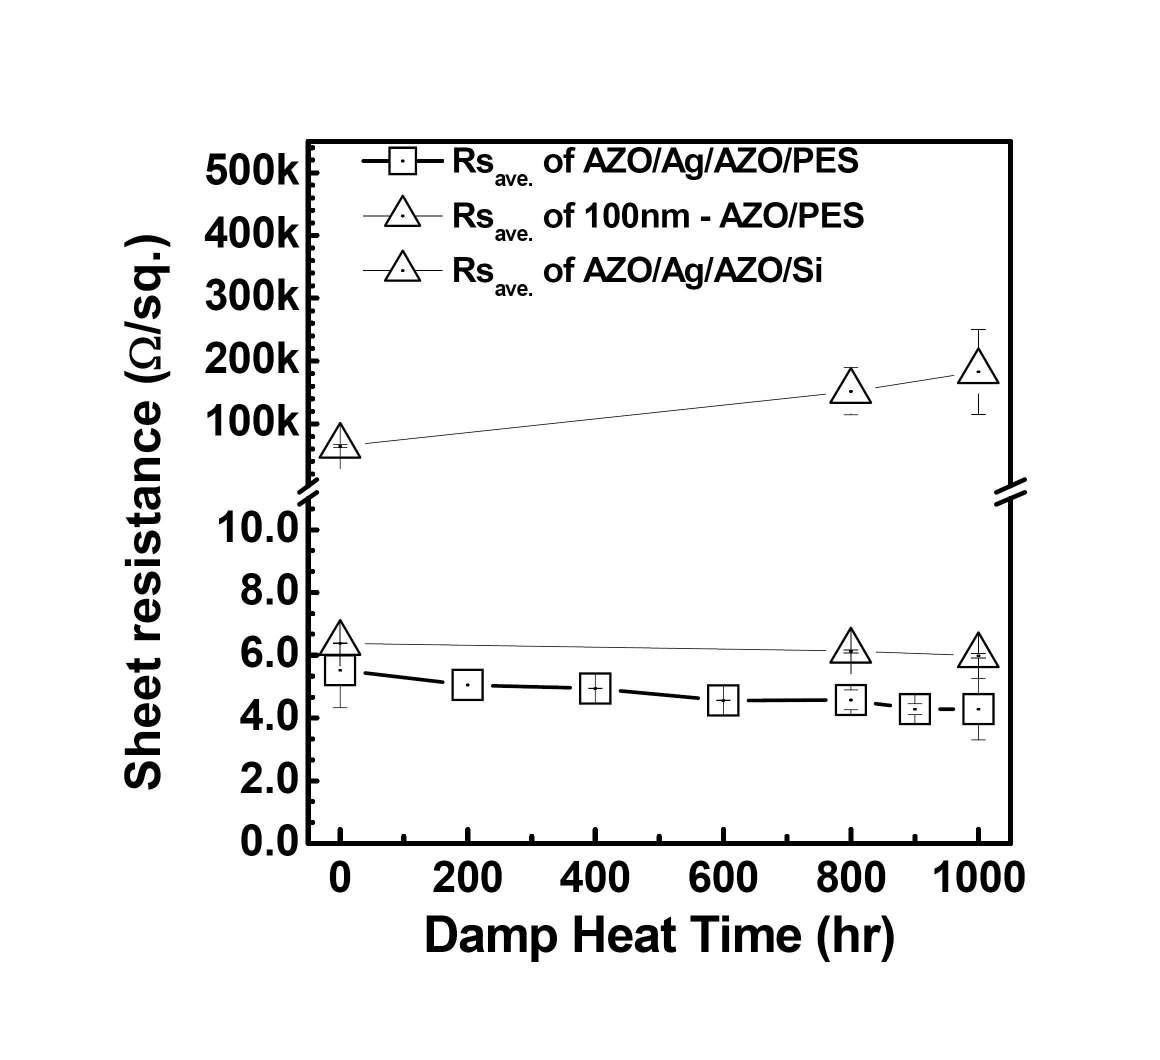 Variations in electrical resistances of 45nm-AZO/9nm-Ag/45nm-AZO and 100-nm-AZO samples as a function of damp heat treatment time